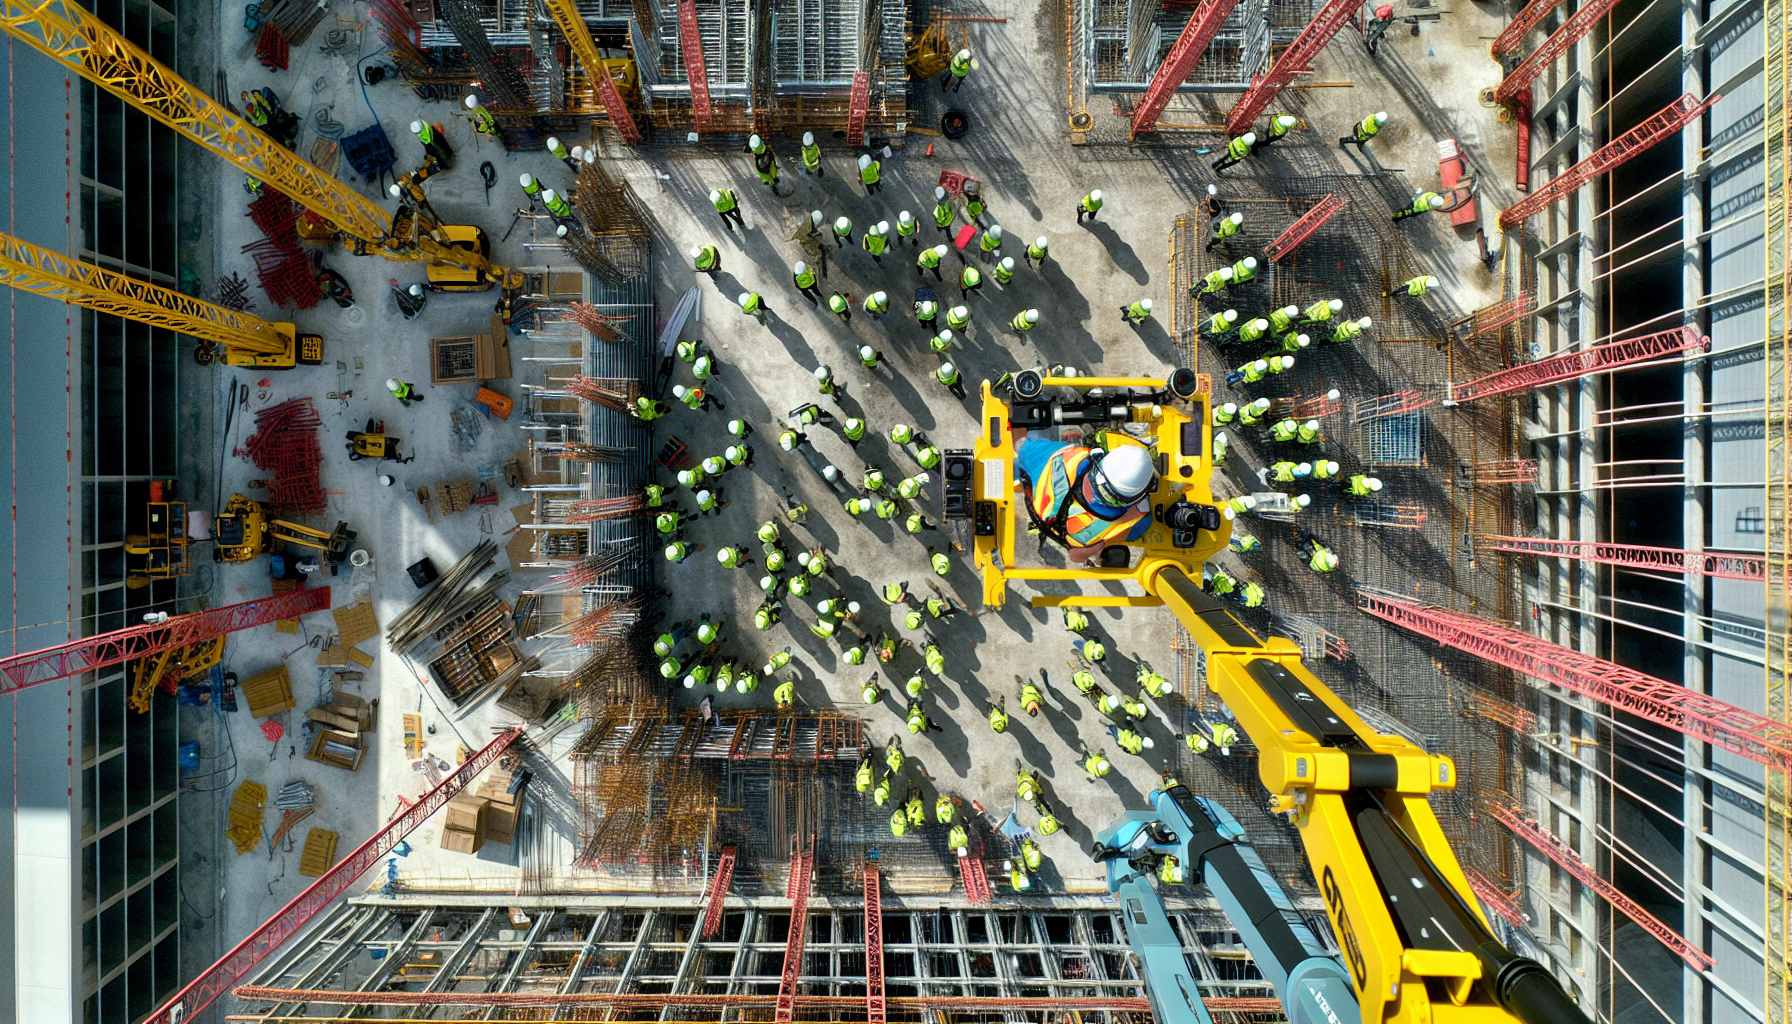 Aerial view of a construction site with drones flying overhead